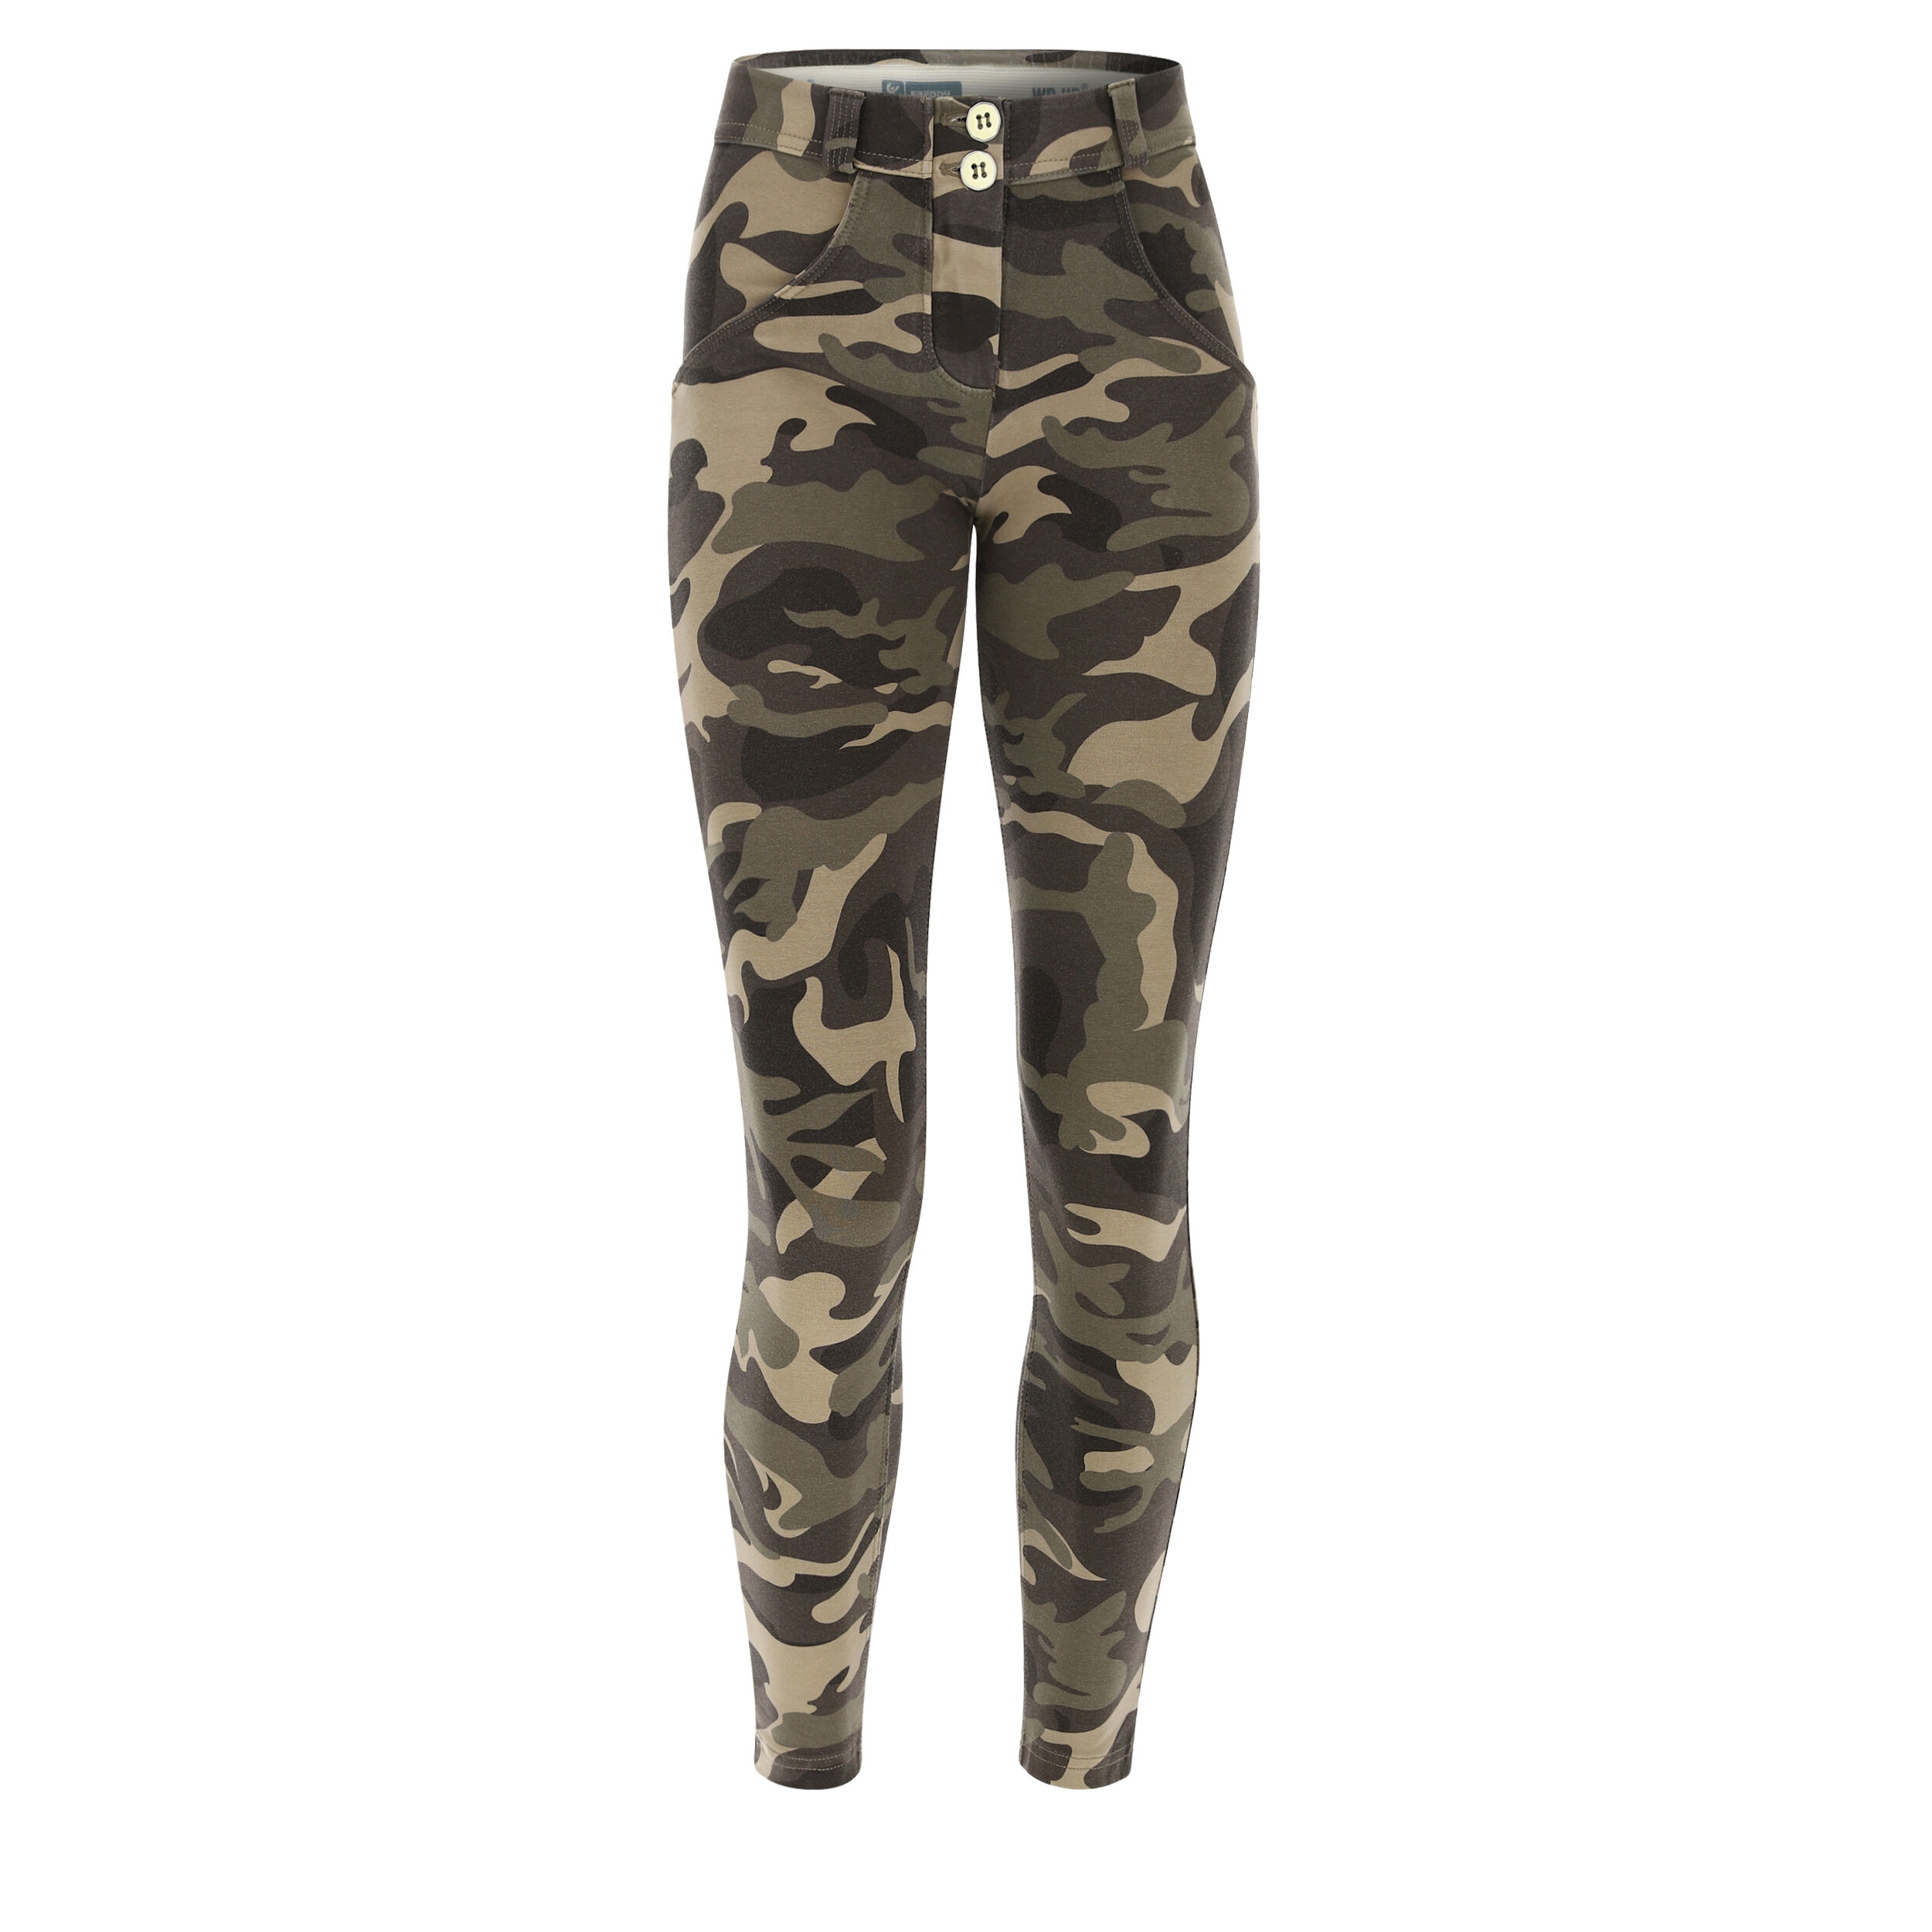 freddy pantaloni push up wr.up® 7/8 superskinny stampa camouflage marrone-mimetico donna large